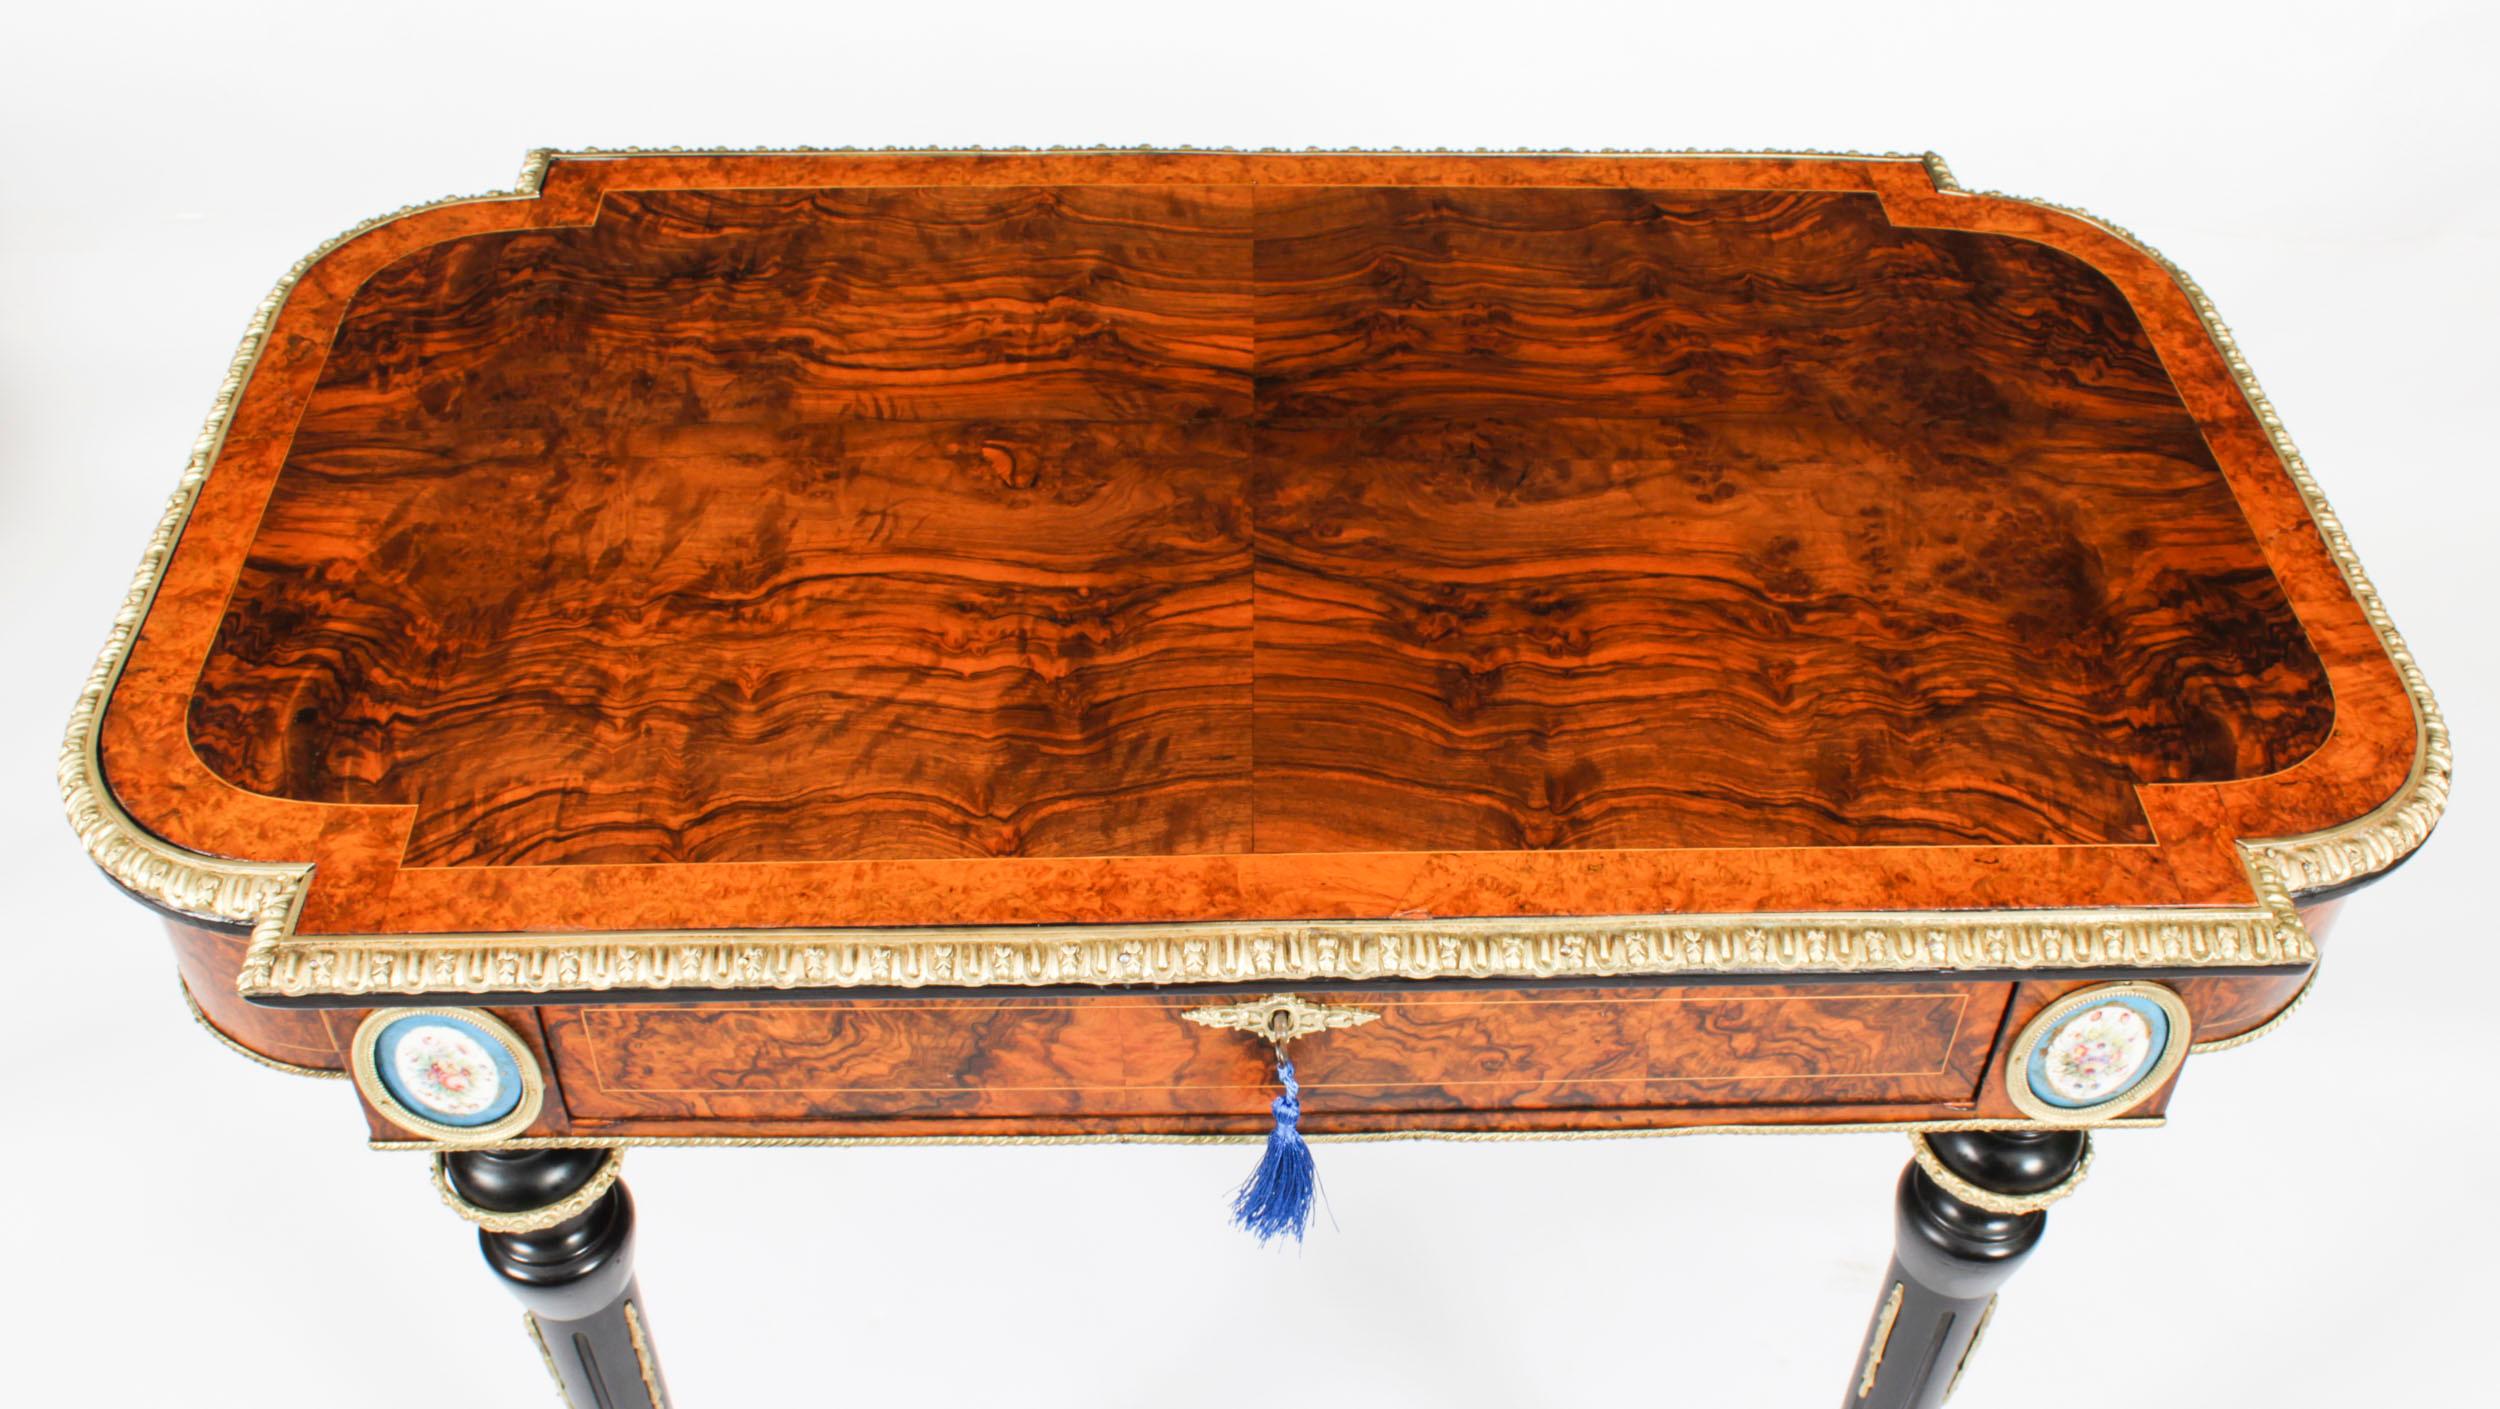 Antique French Burr Walnut Sevres & Ormolu Mounted Writing Table Desk 19th C In Good Condition For Sale In London, GB